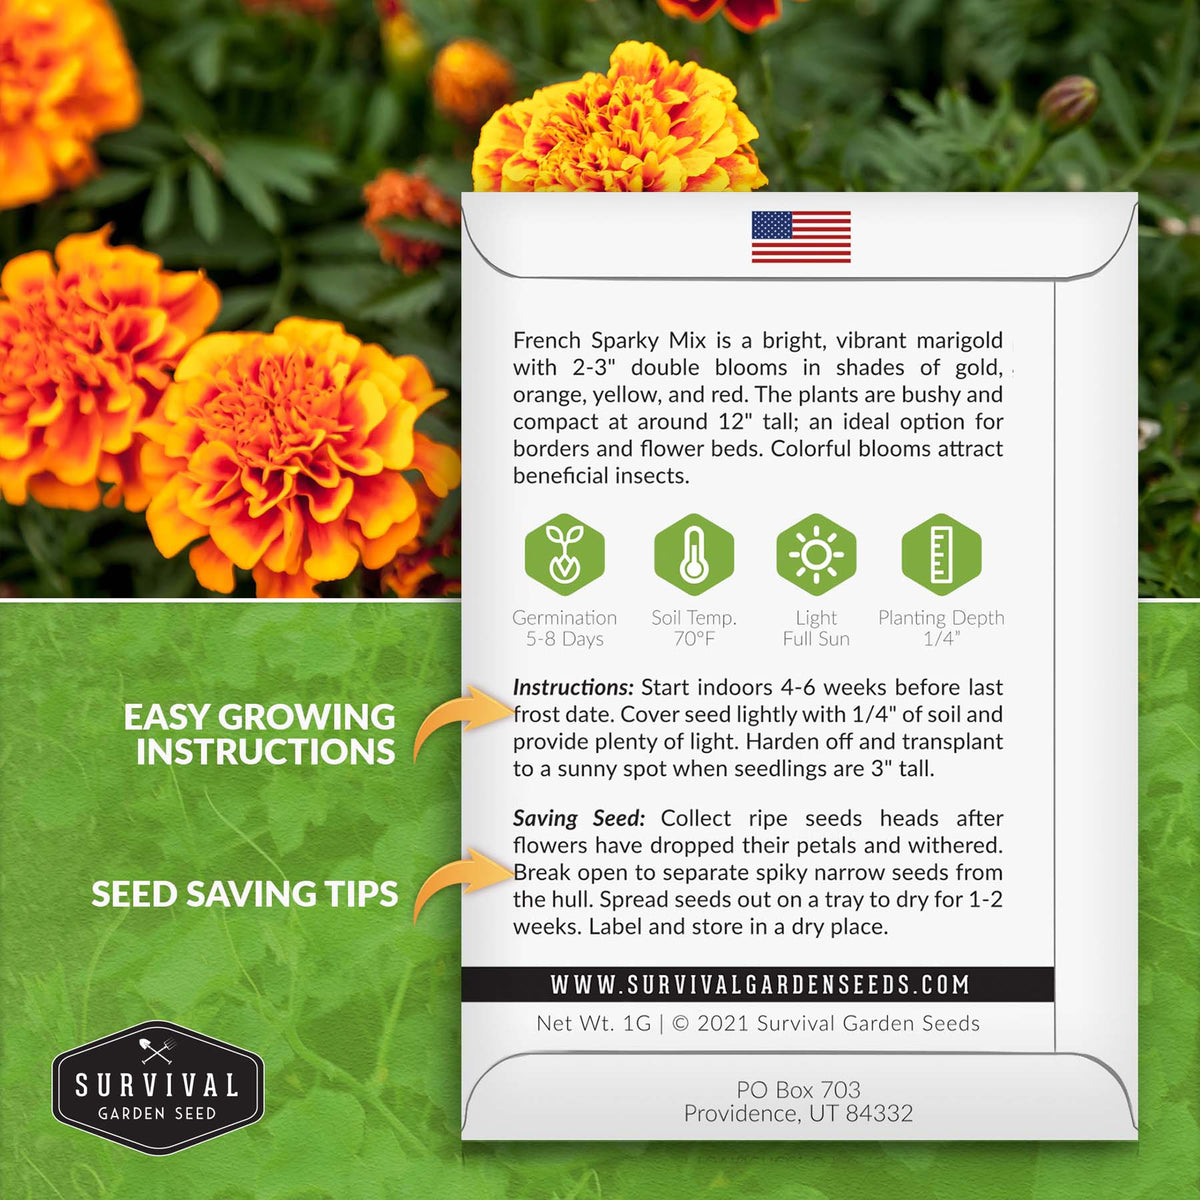 French Sparky Mix Marigold seed planting instructions